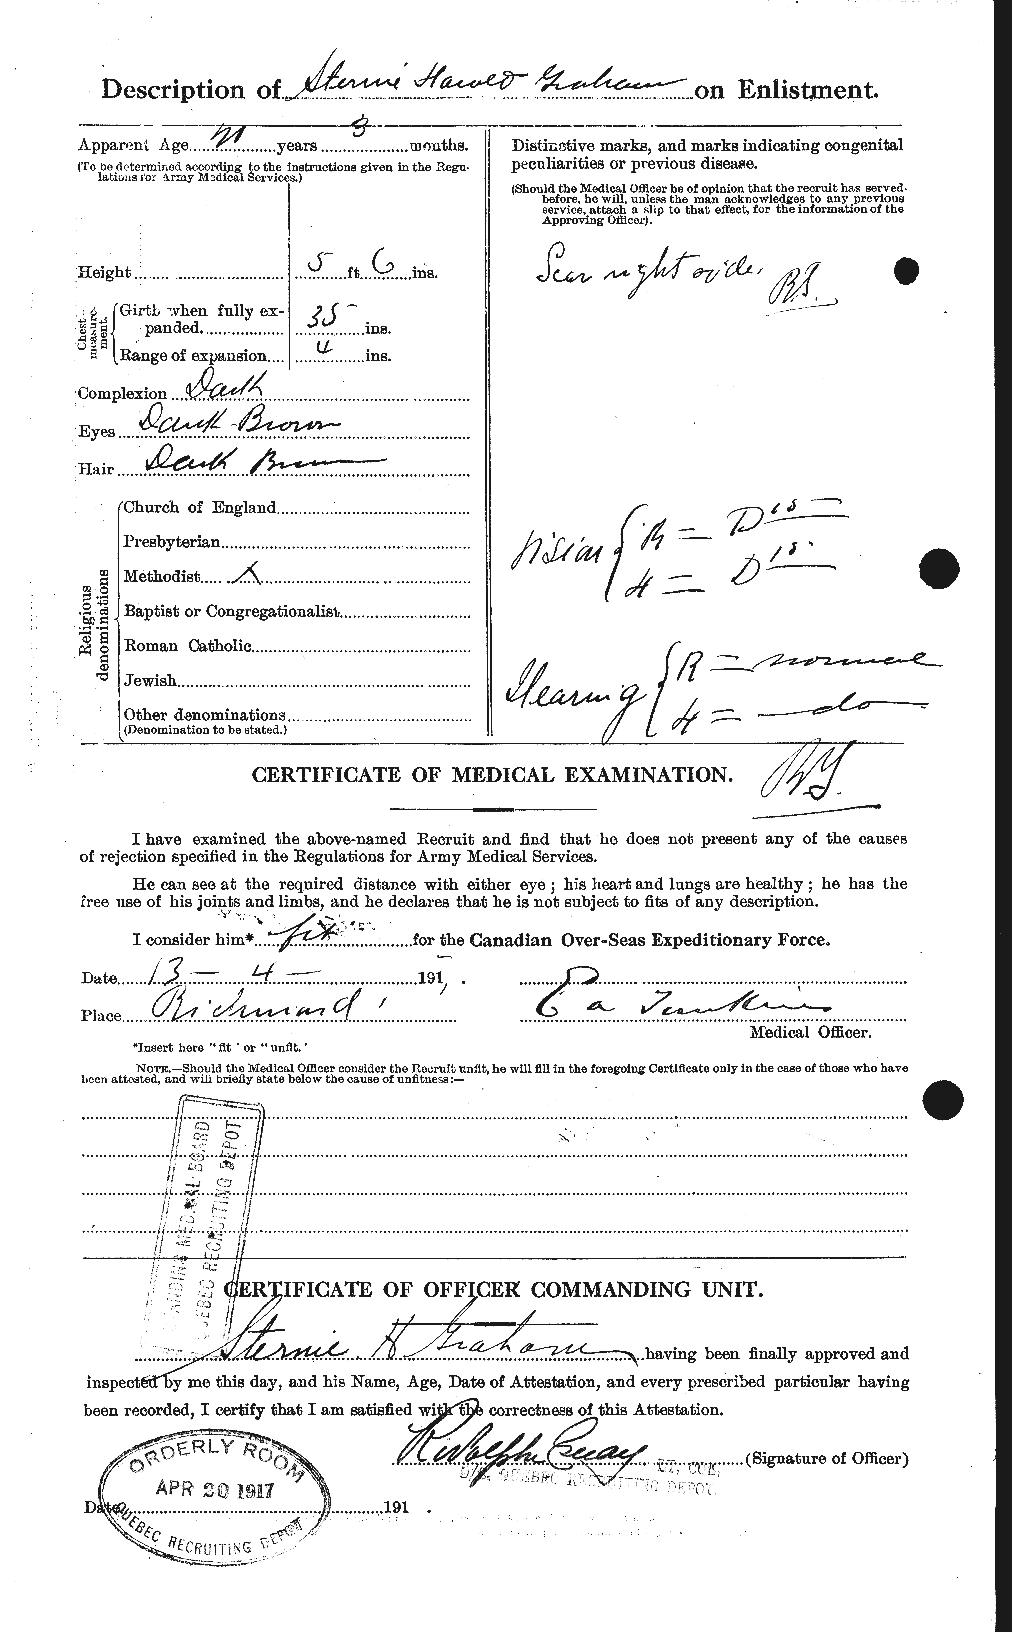 Personnel Records of the First World War - CEF 359471b